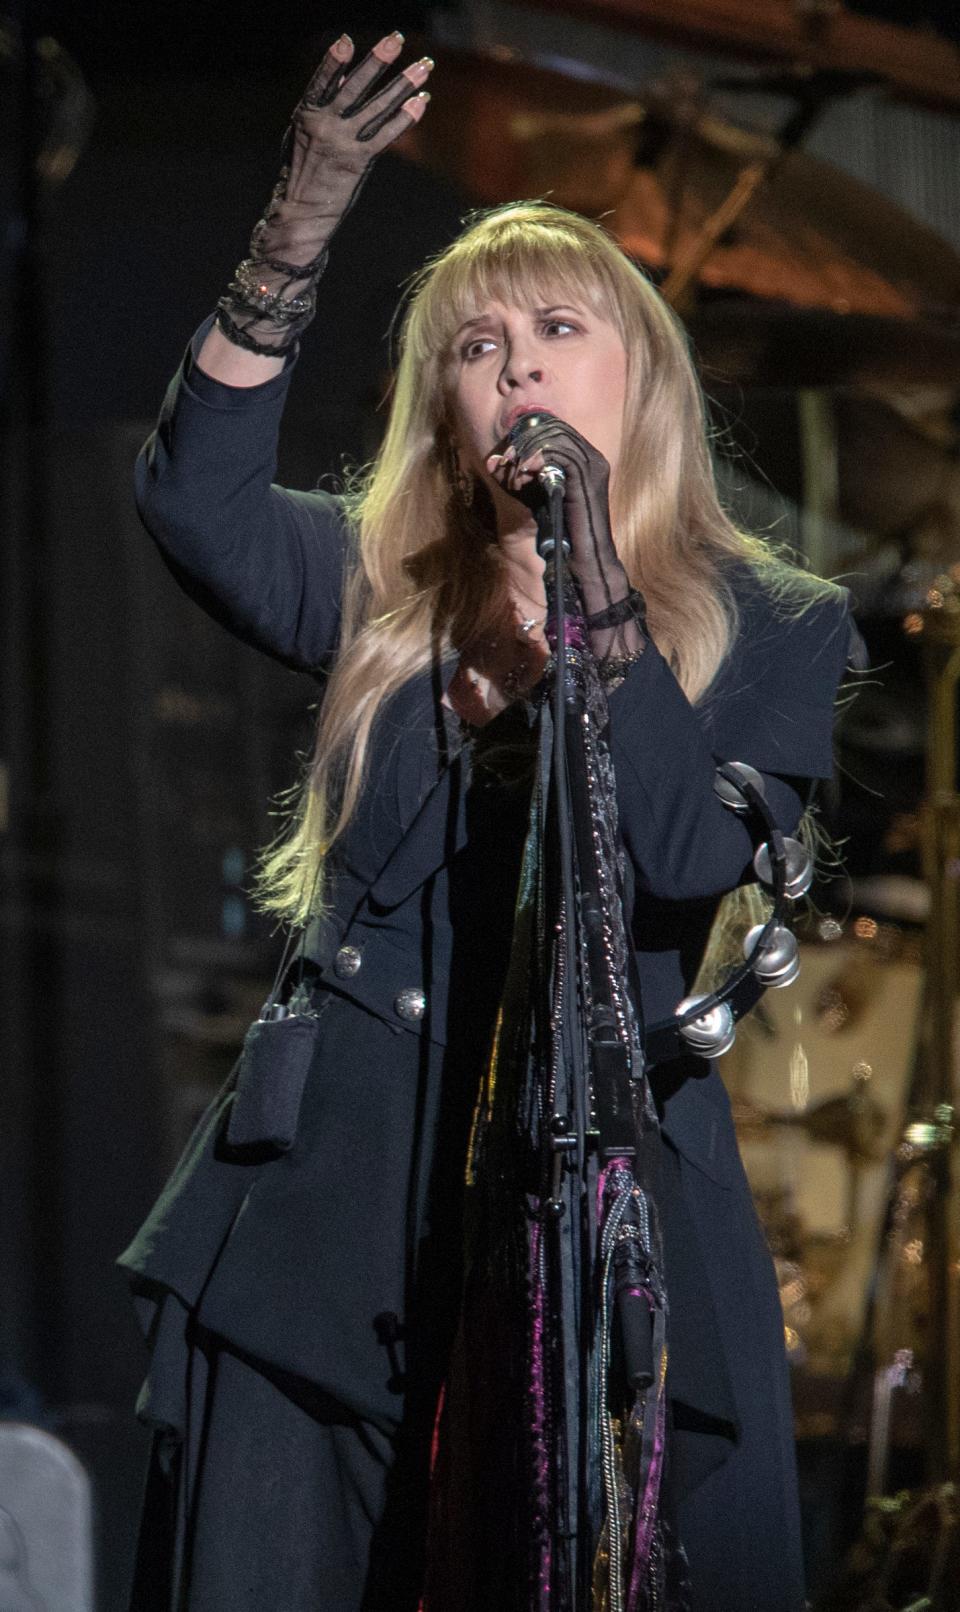 Stevie Nicks, during a performance by Fleetwood Mac at Bankers Life Fieldhouse, Indianapolis, Tuesday, Oct. 16, 2018. The band is playing on their current North American tour. 